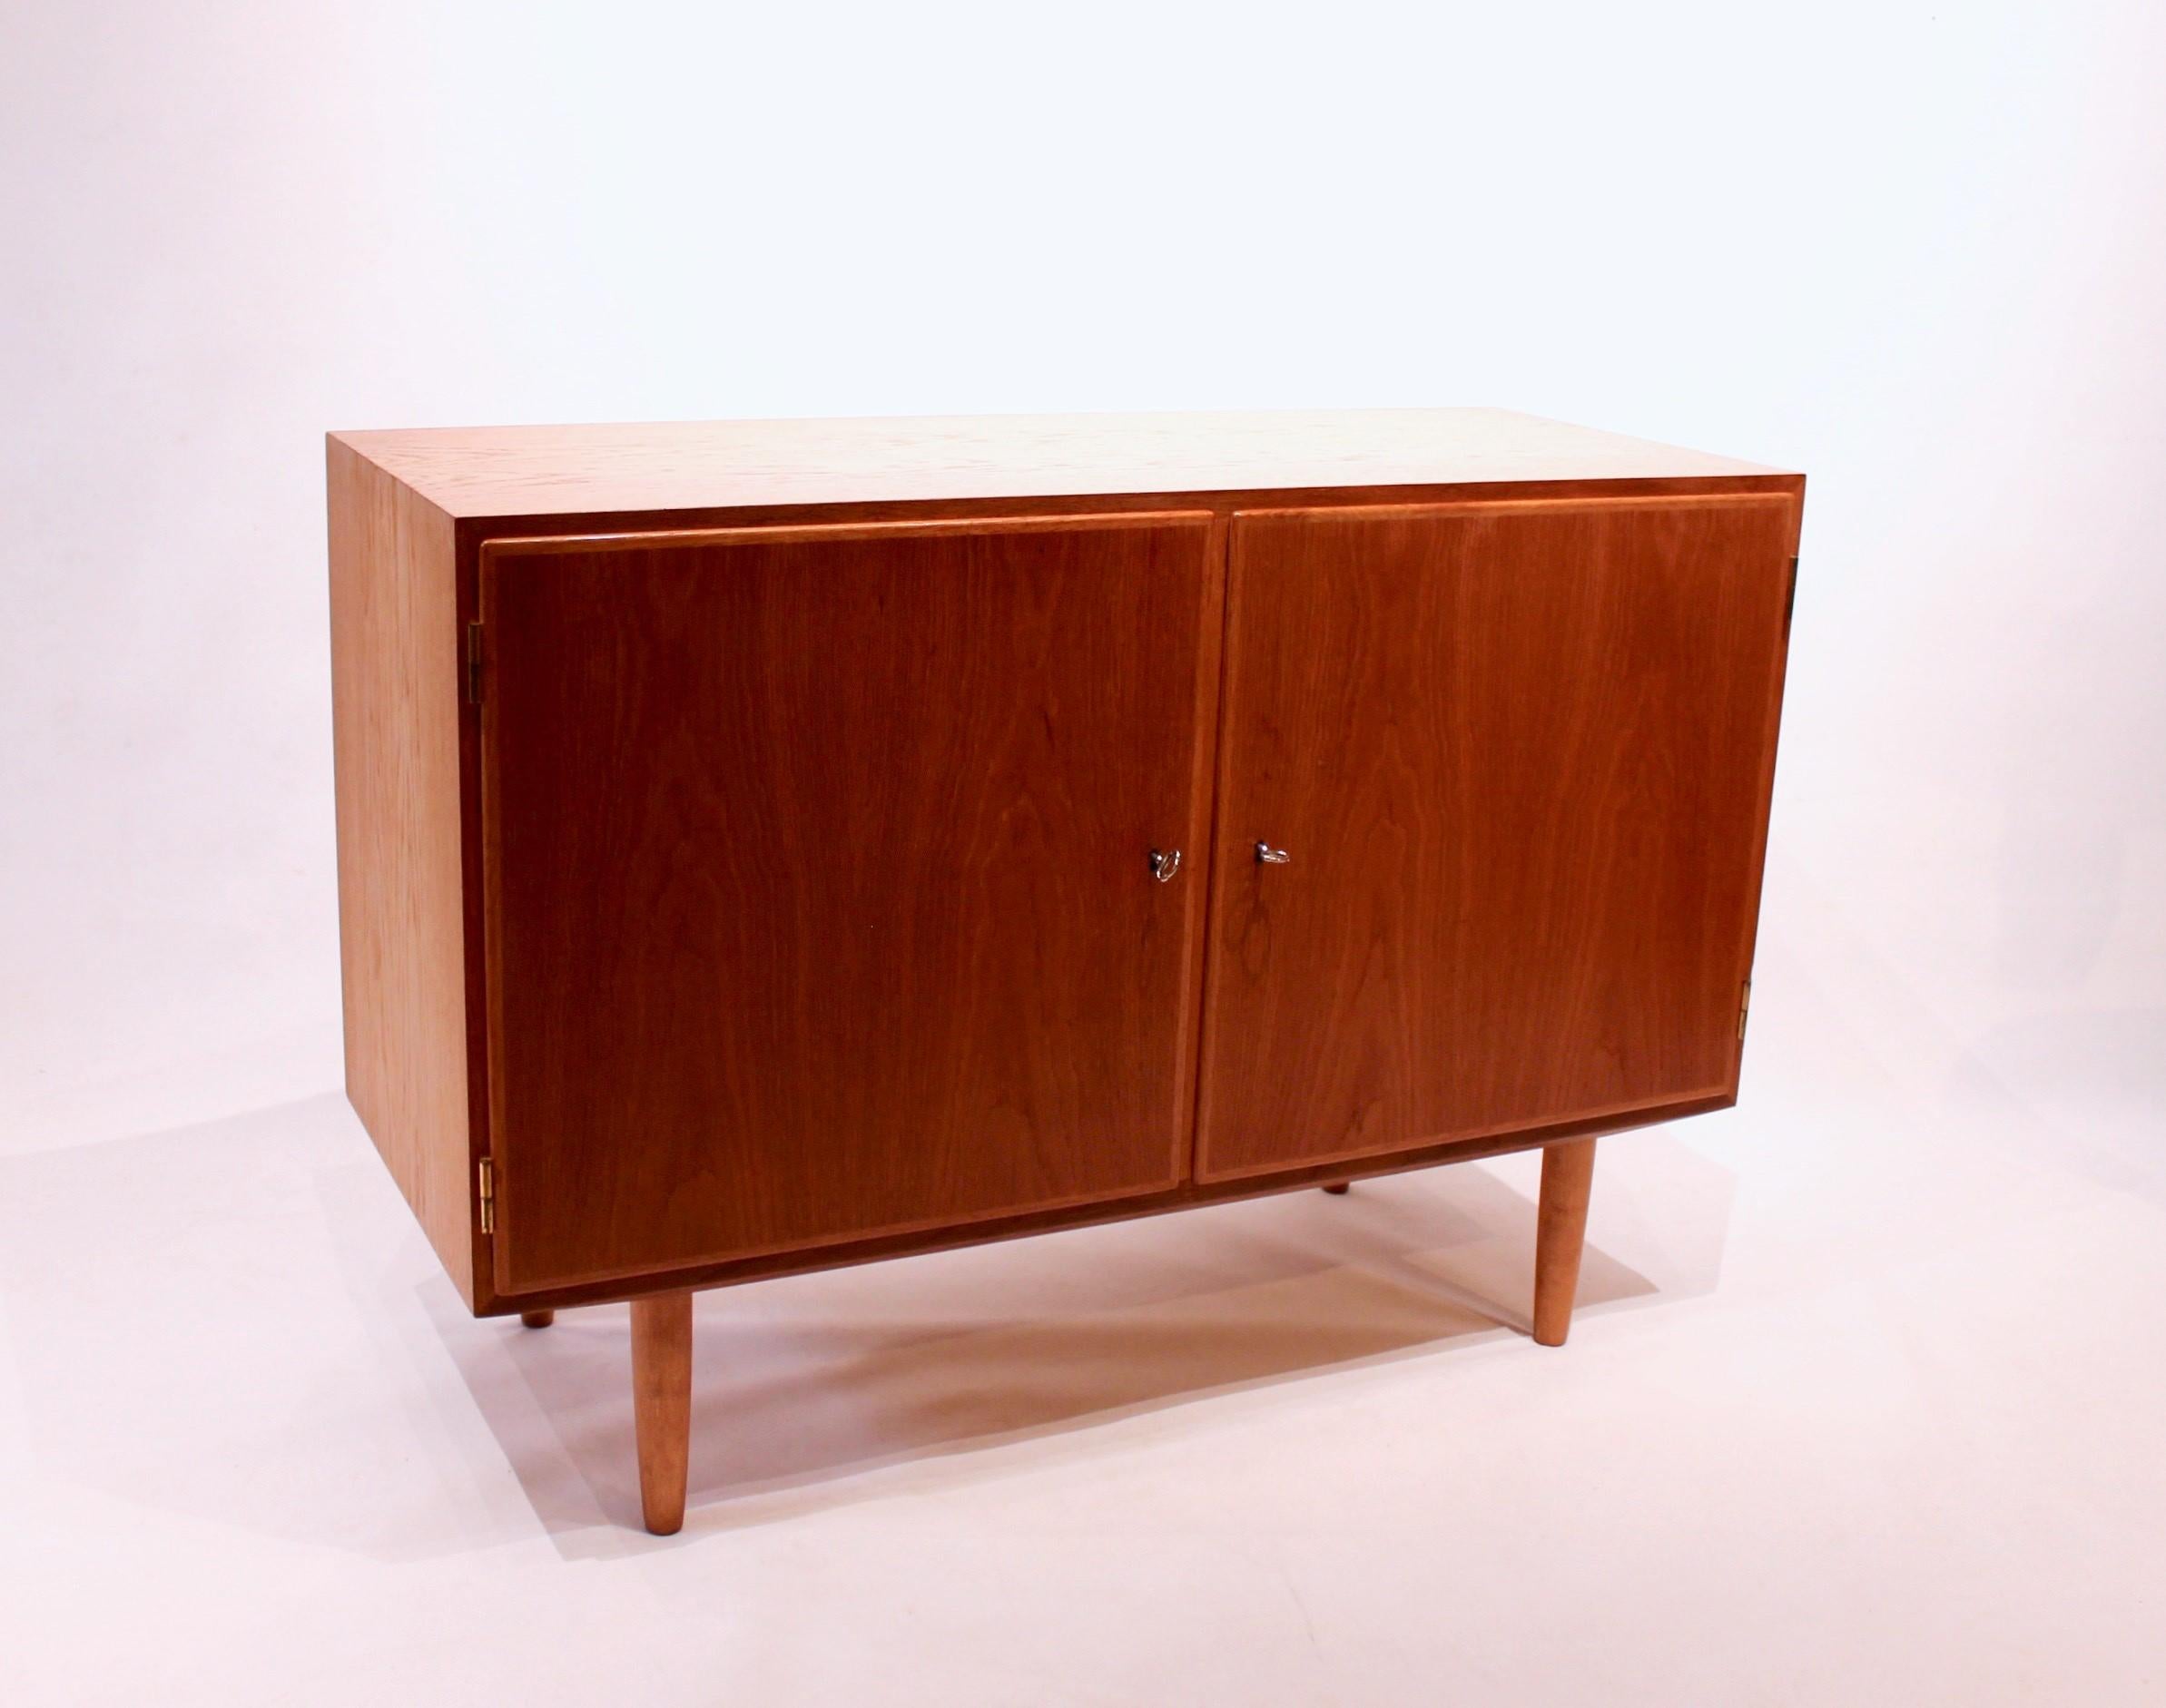 Sideboard of oak with two doors of Danish design from the 1960s. The sideboard is in great vintage condition and we have two in stock, but will be sold separately.